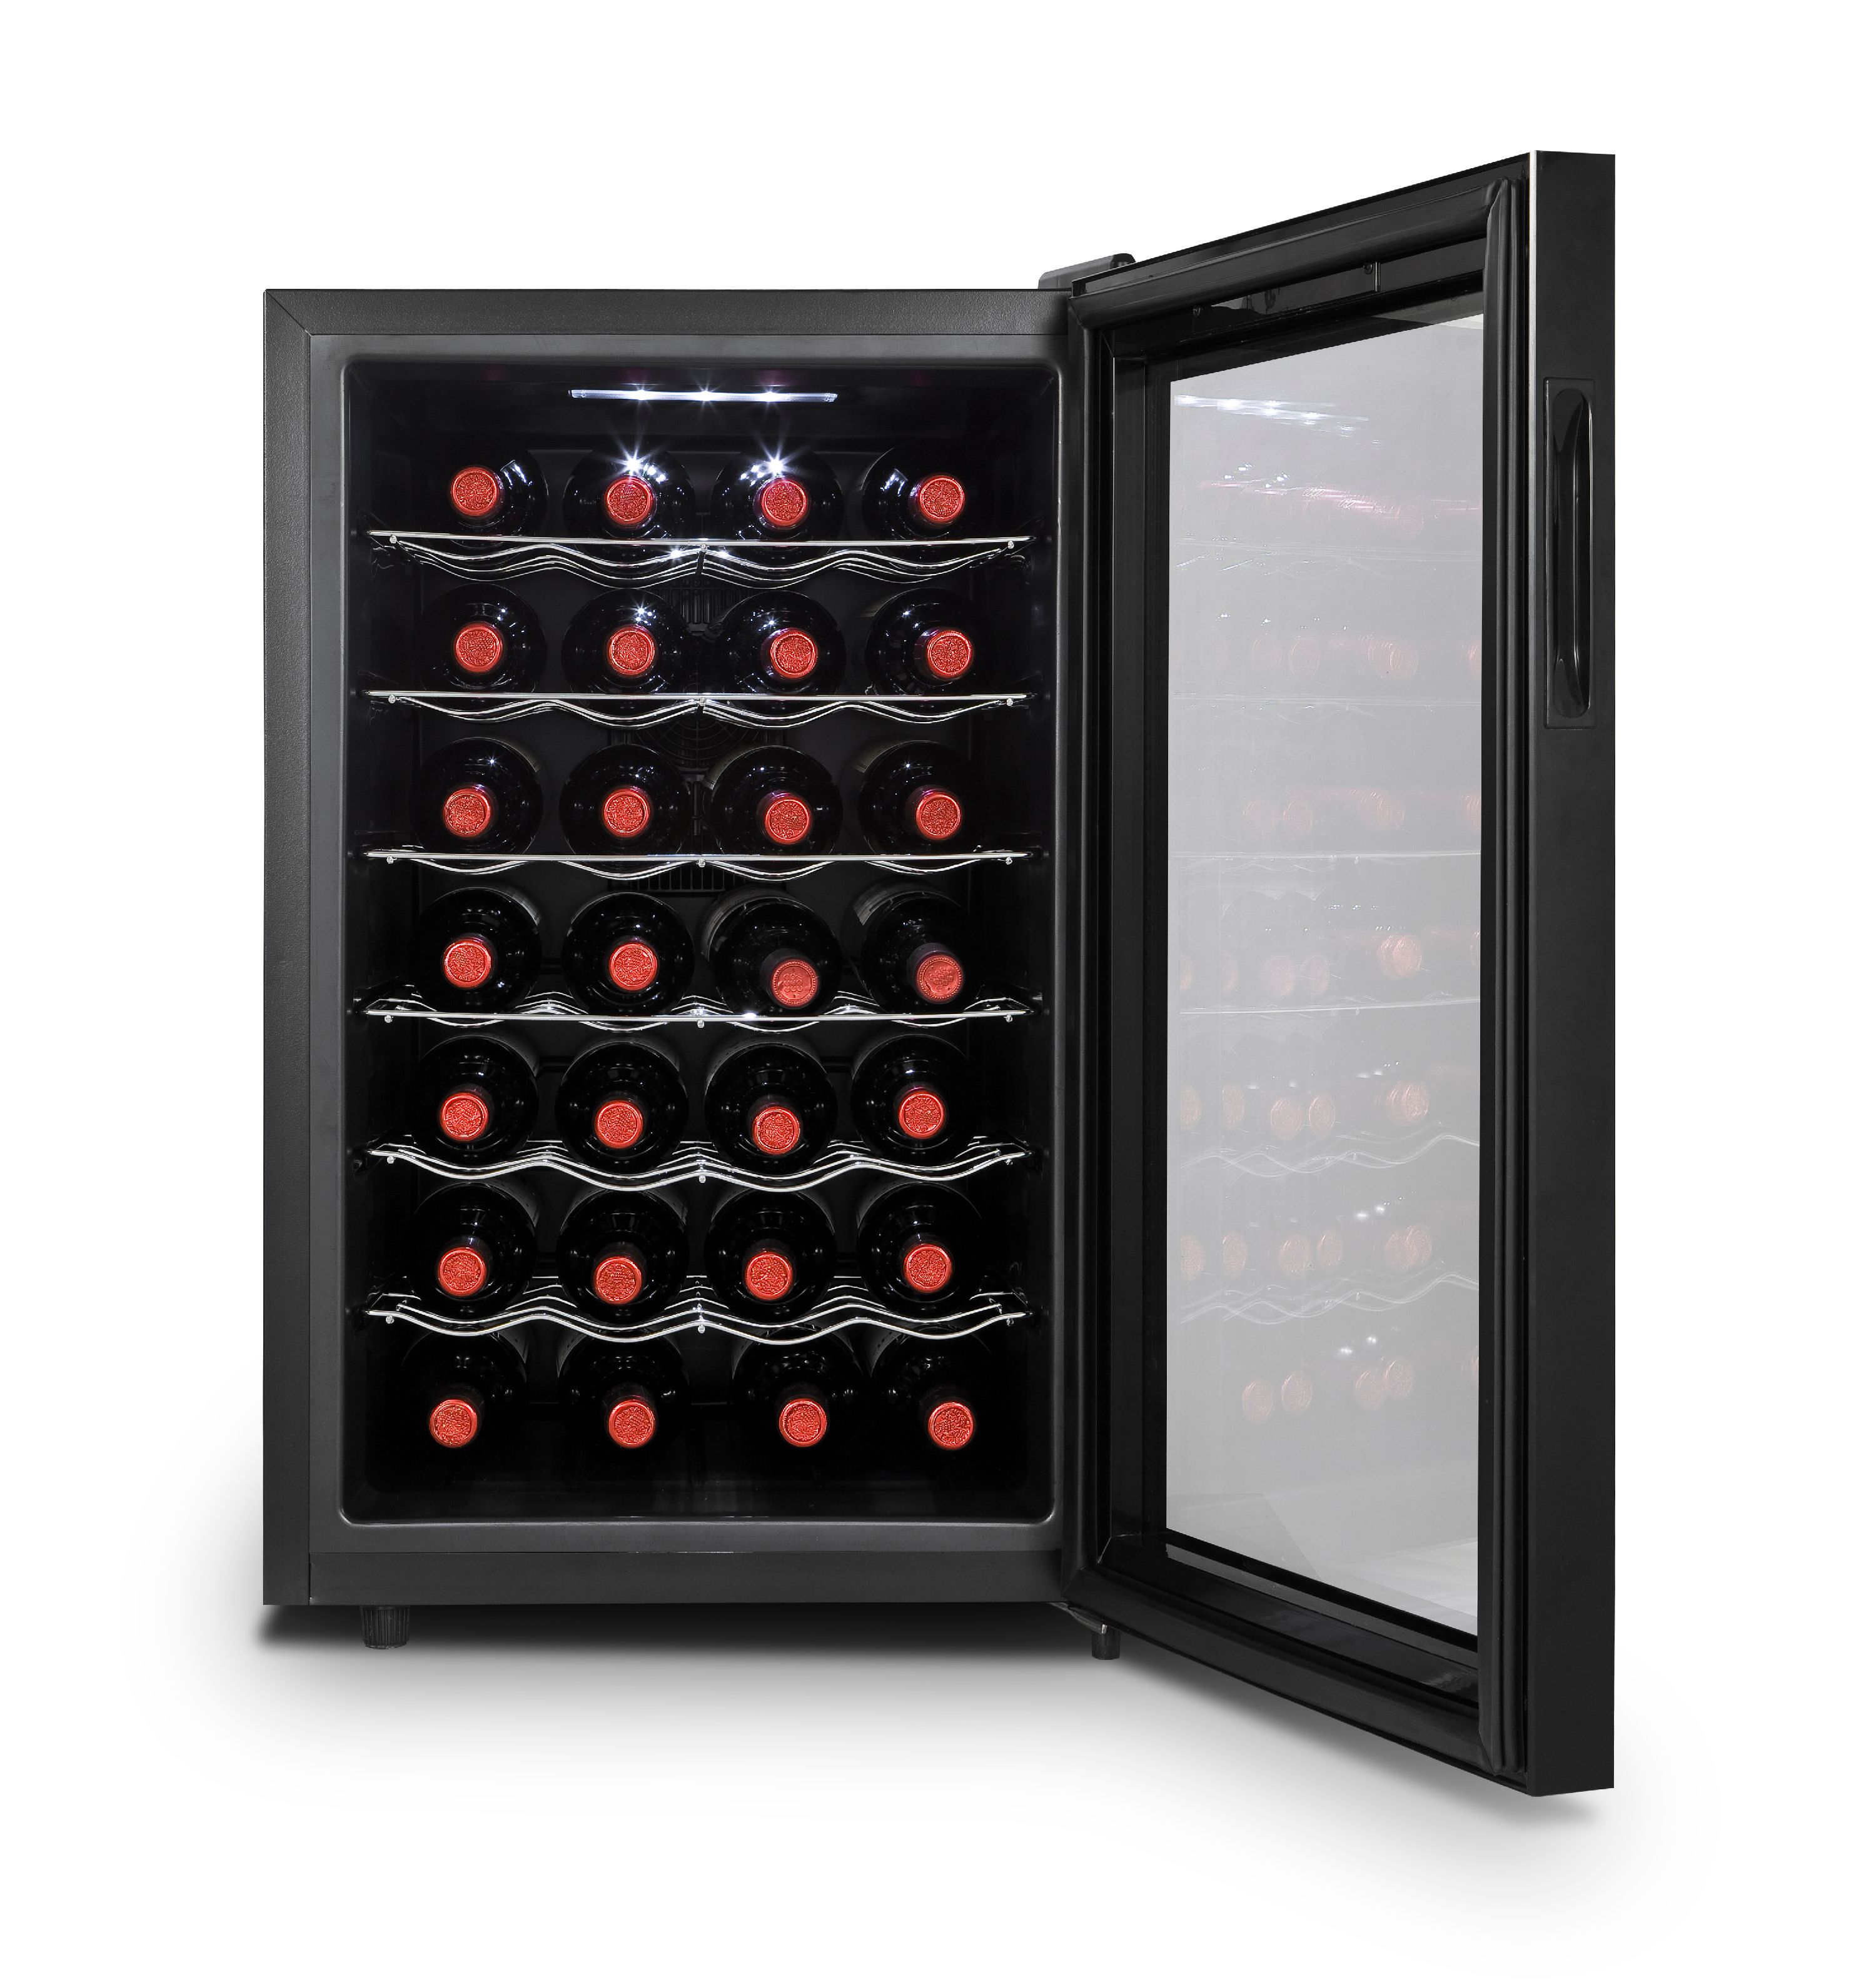 RCA, 28 Bottle Thermoelectric Wine Cooler (RFRW284H) - image 1 of 4